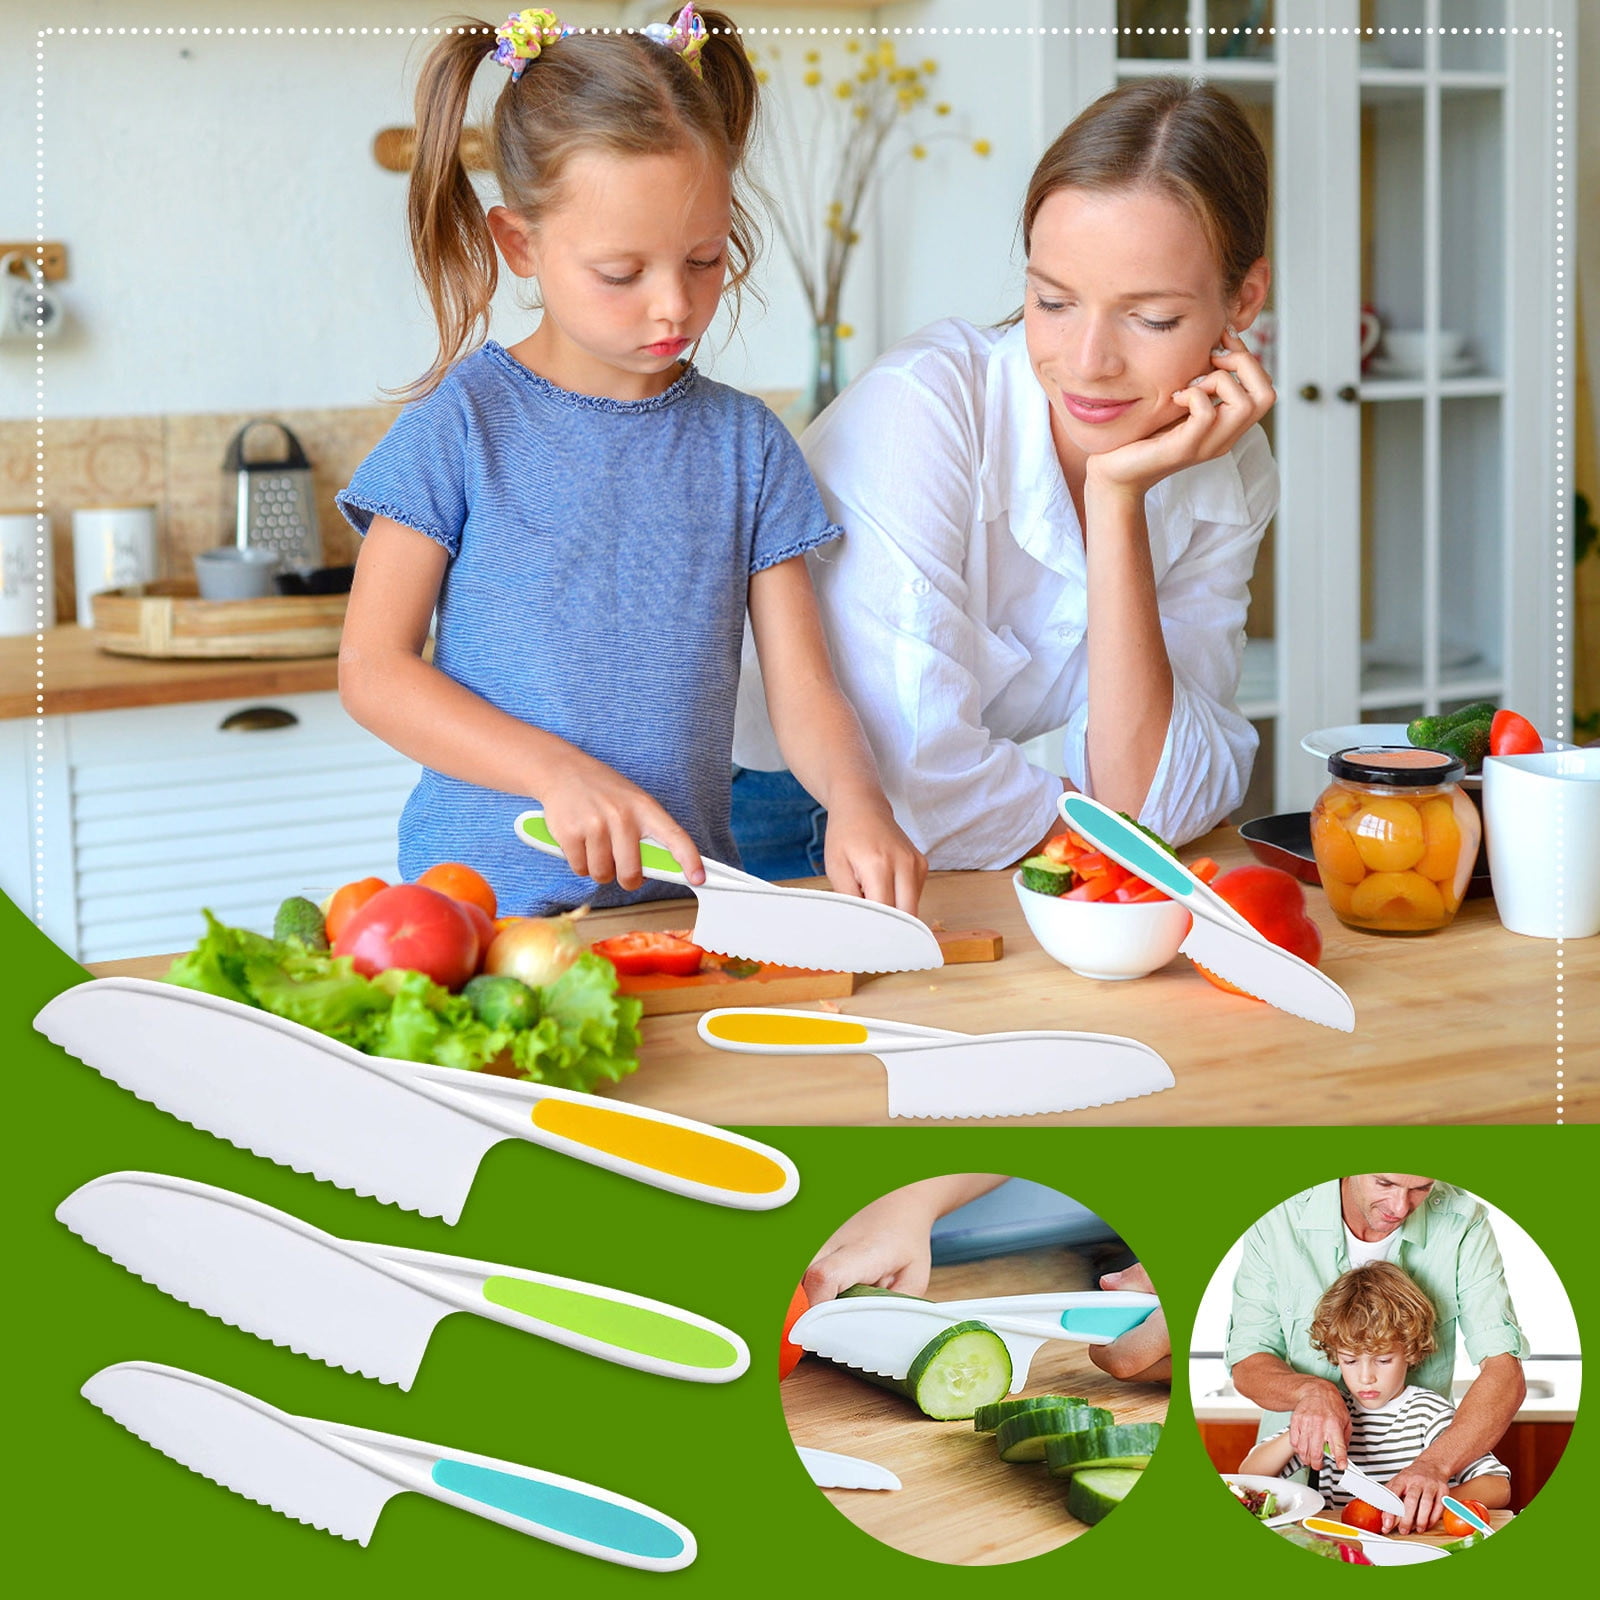 Leking 3 Pcs Kids Kitchen Knife, Plastic Serrated Edges Kids Knife Set for  Cooking and Cutting Cakes, Fruits and Veggies, Perfectly Safe for Toddler  Chef Knife Set for Kids Real Cooking 